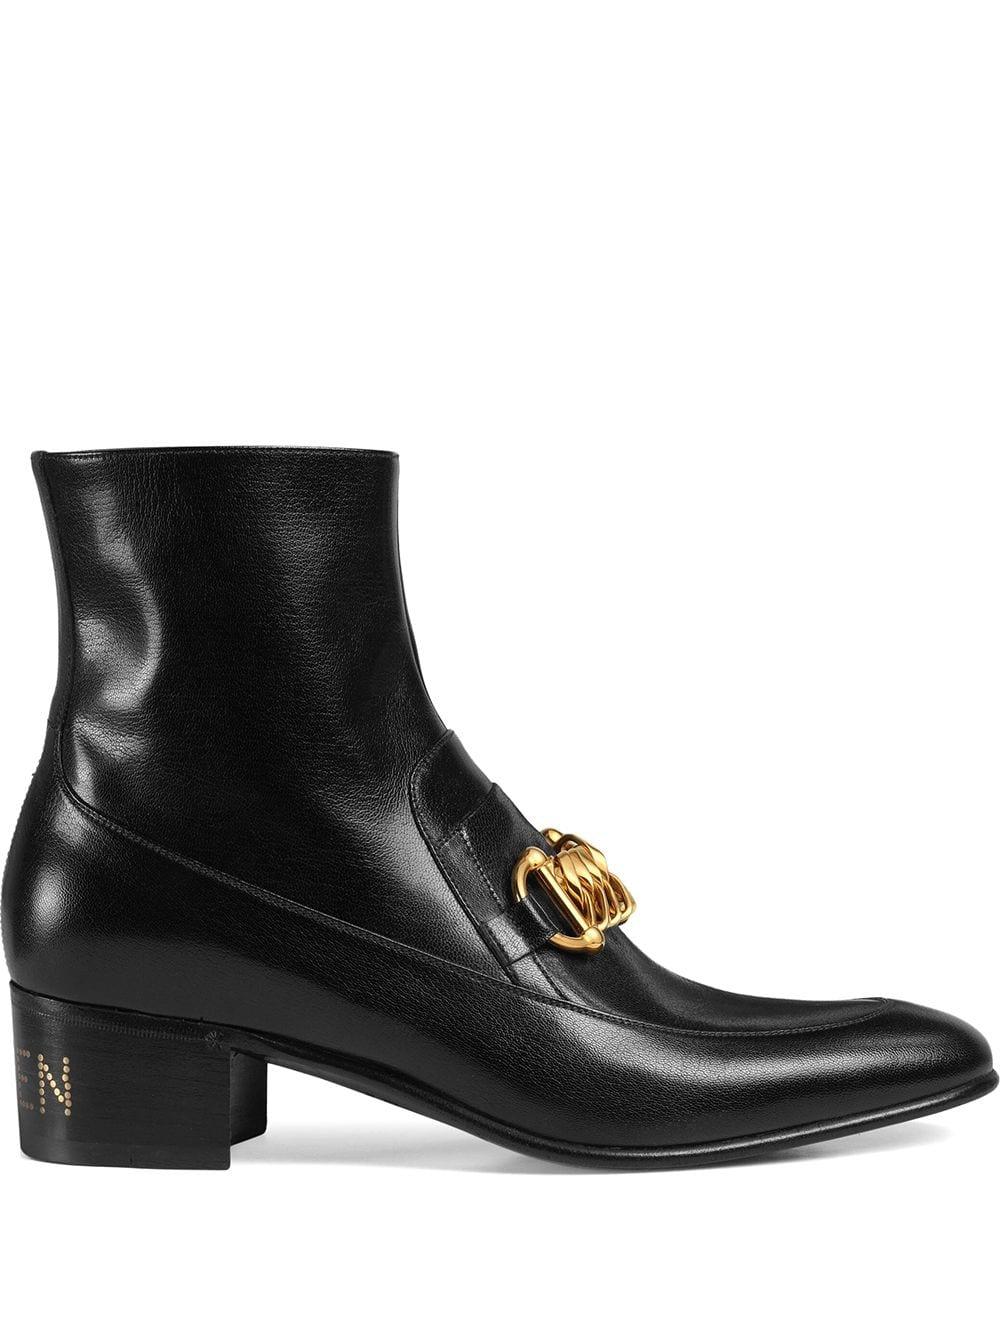 Gucci Leather Horsebit Chain Boots in Black for Men | Lyst